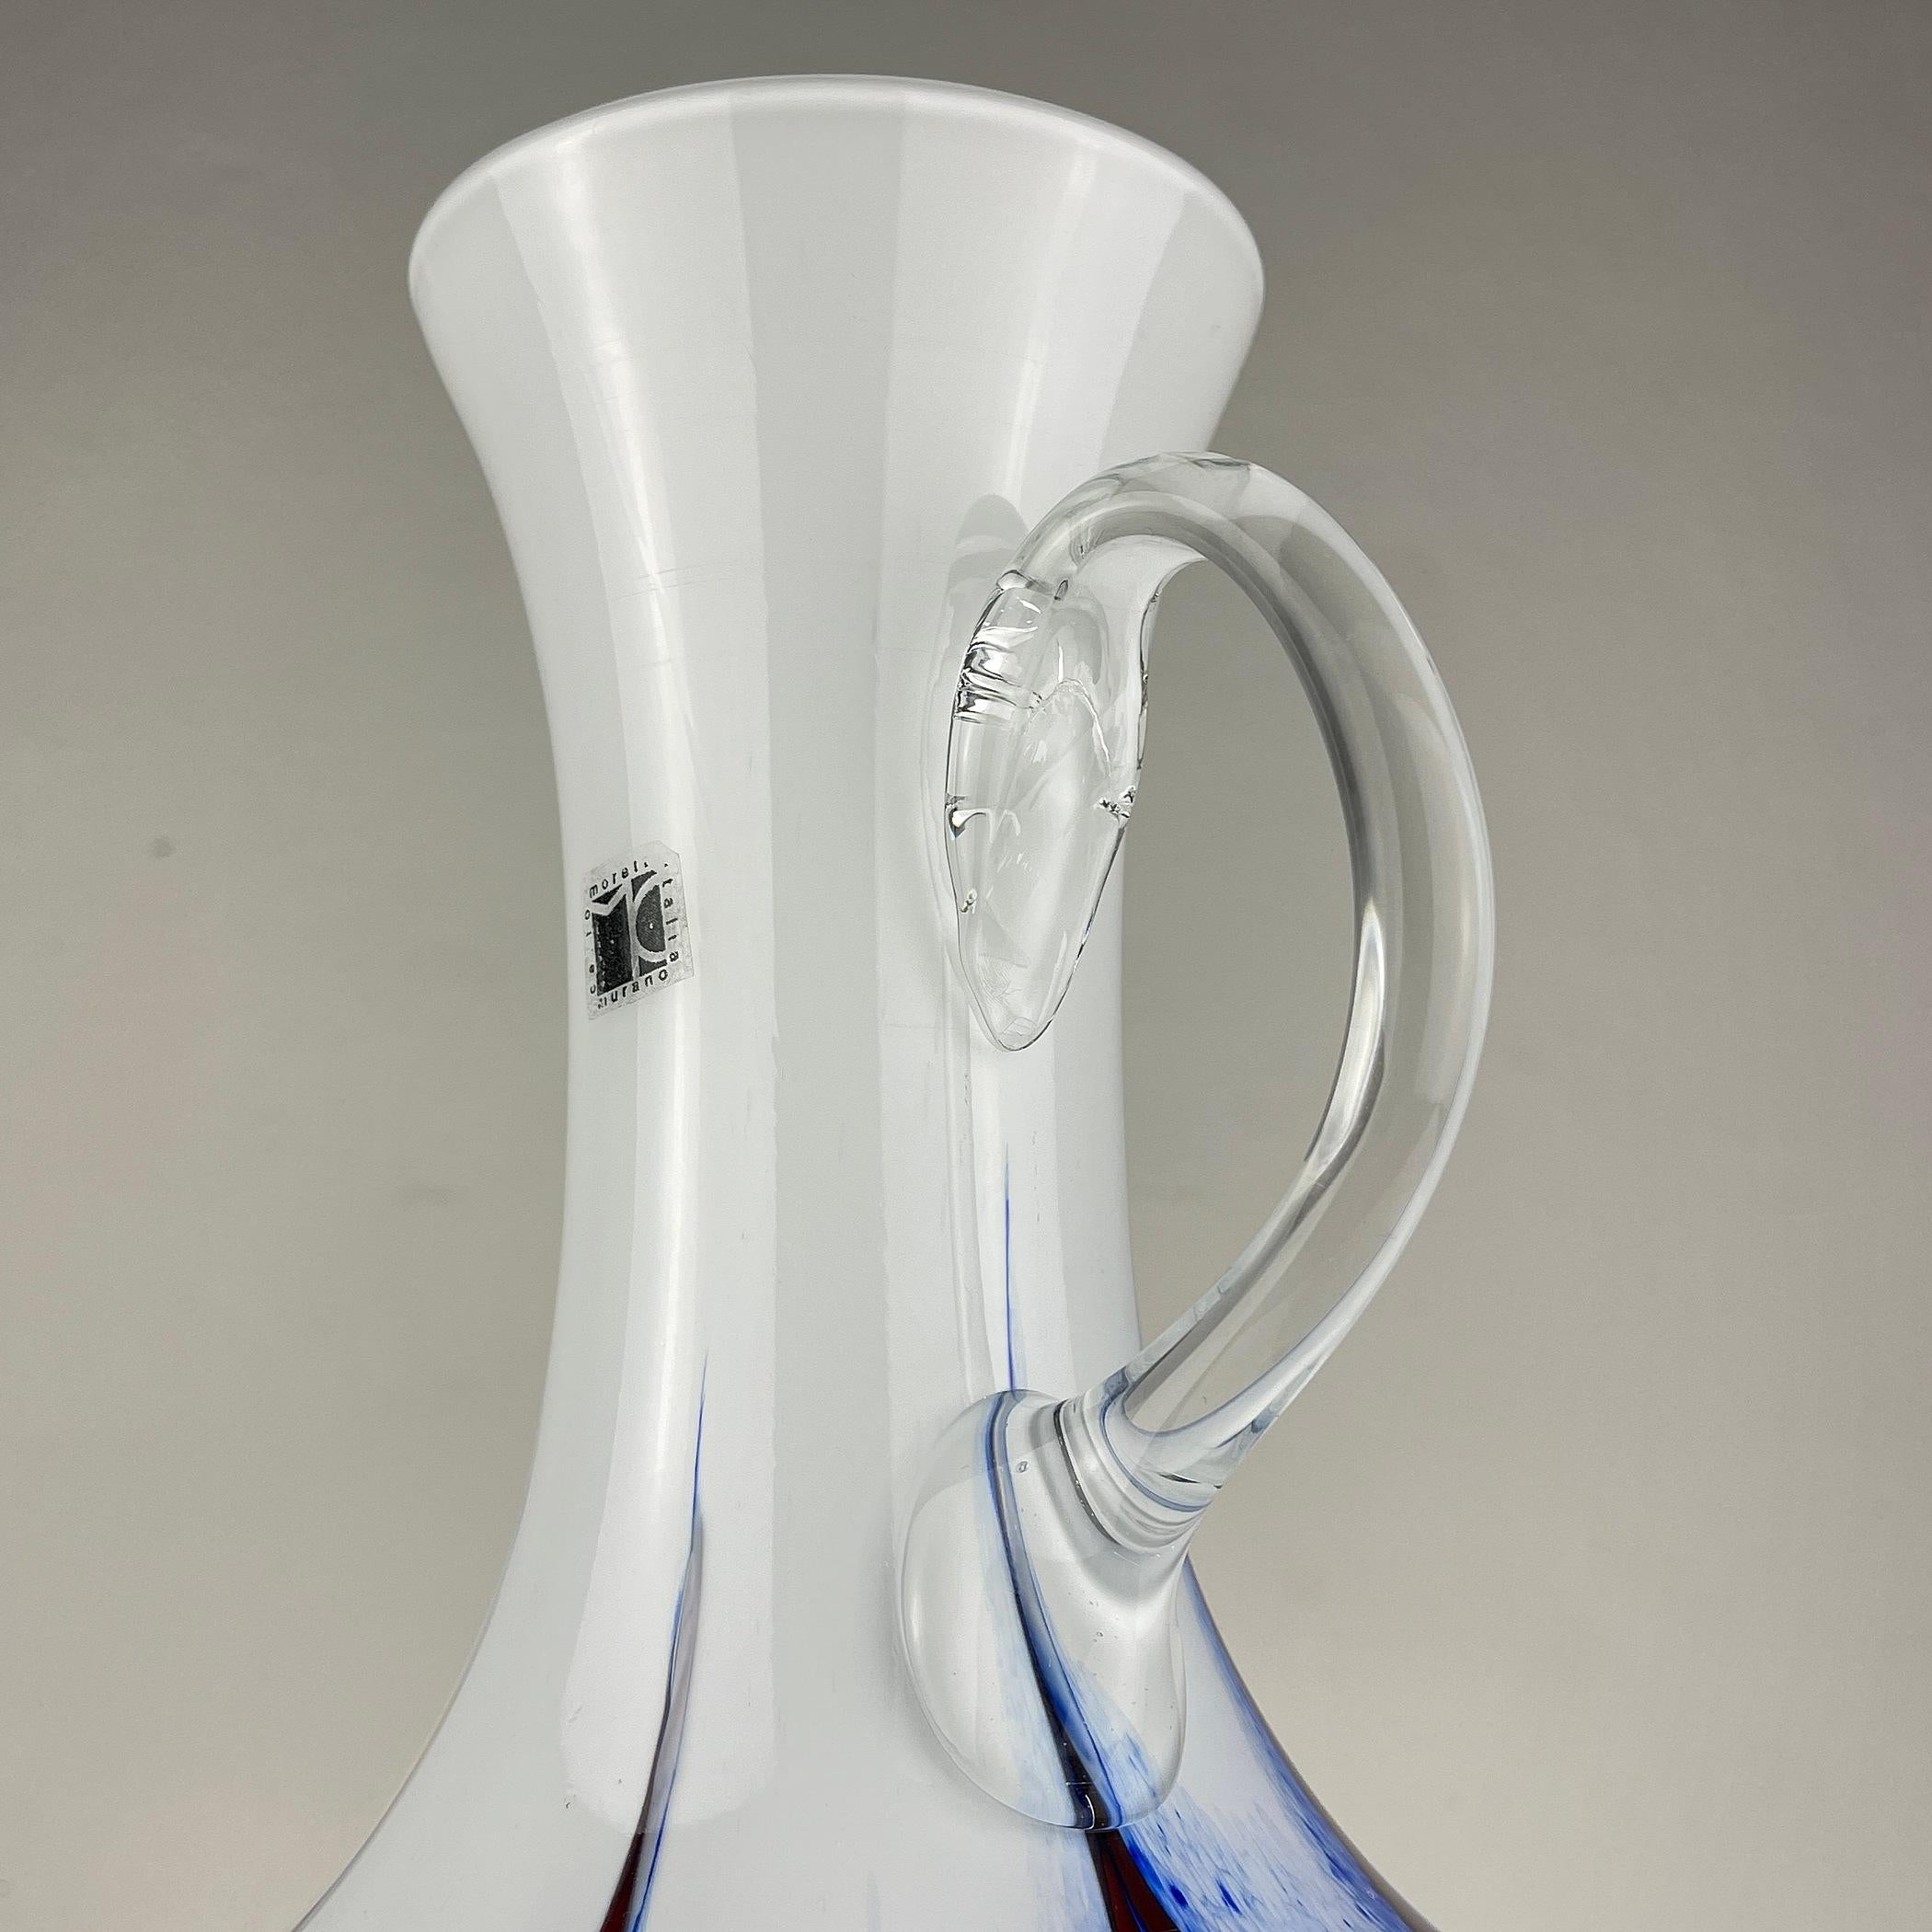 Mid-Century Modern Murano Glass Hand-Cut Pitcher by Carlo Moretti Italy 1970s For Sale